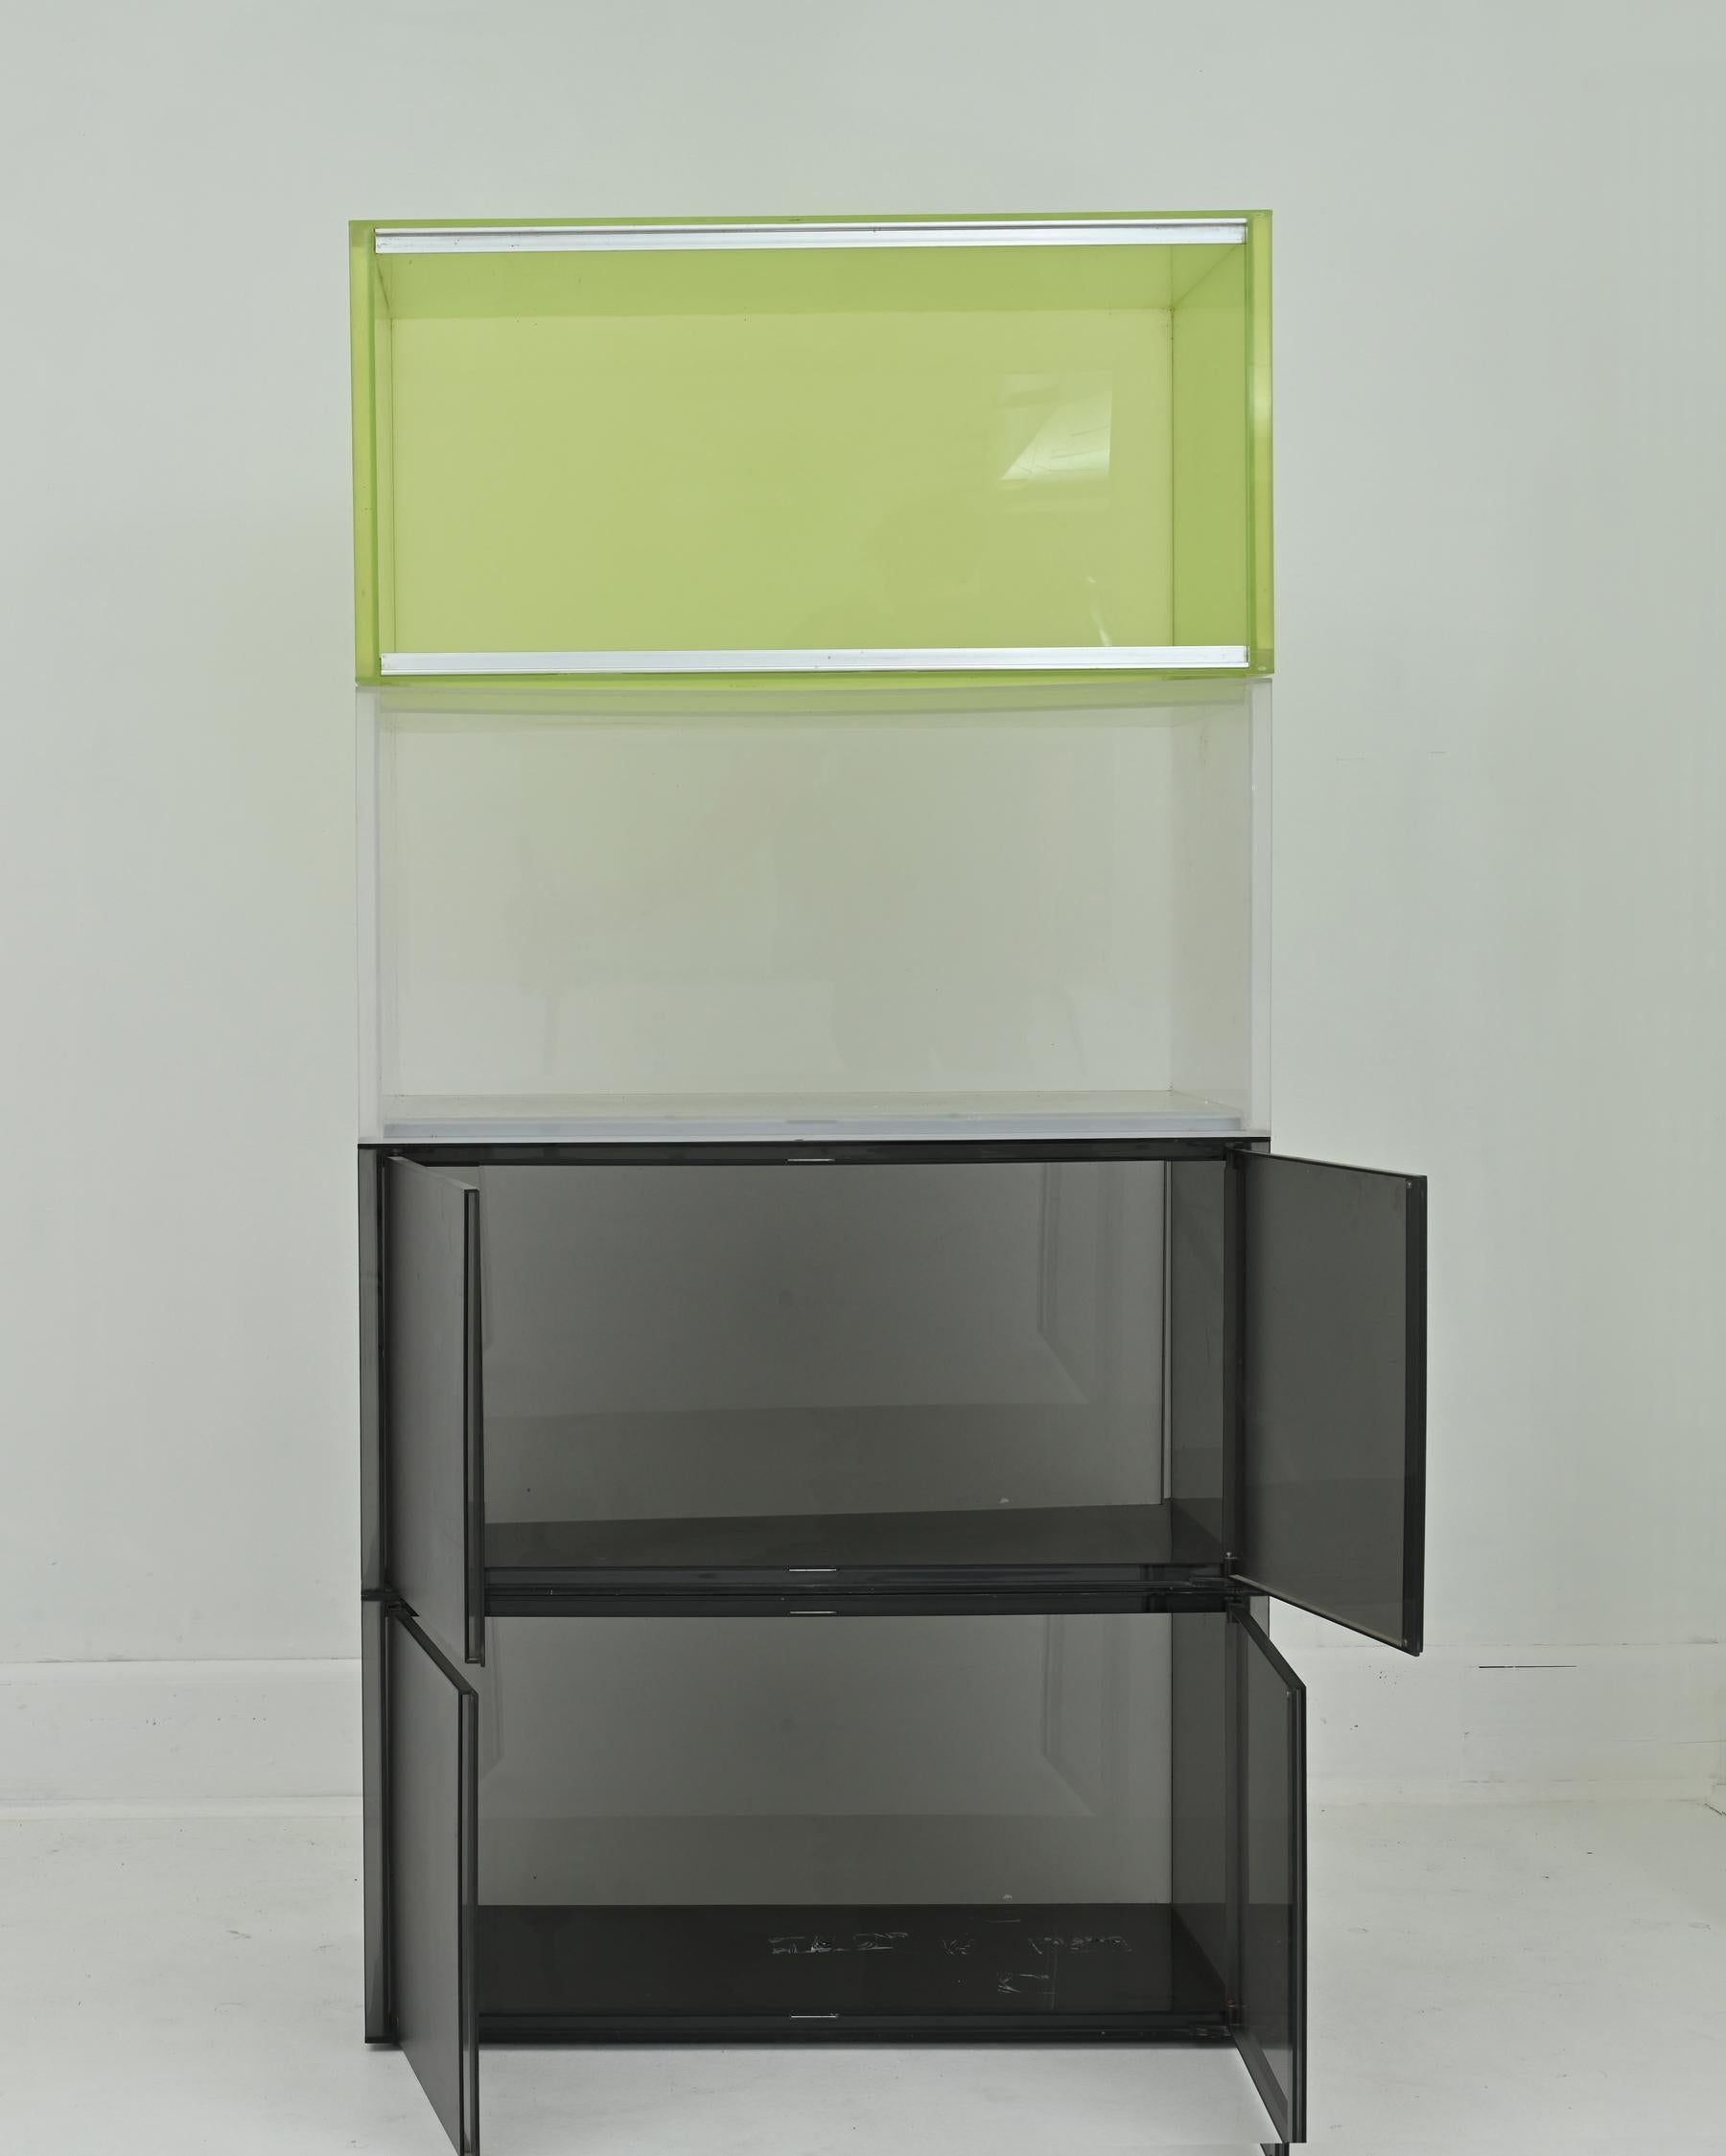 Post-Modern 1990s Acrylic Resin and Steel “One” Wall Unit by Piero Lissoni for Kartell For Sale